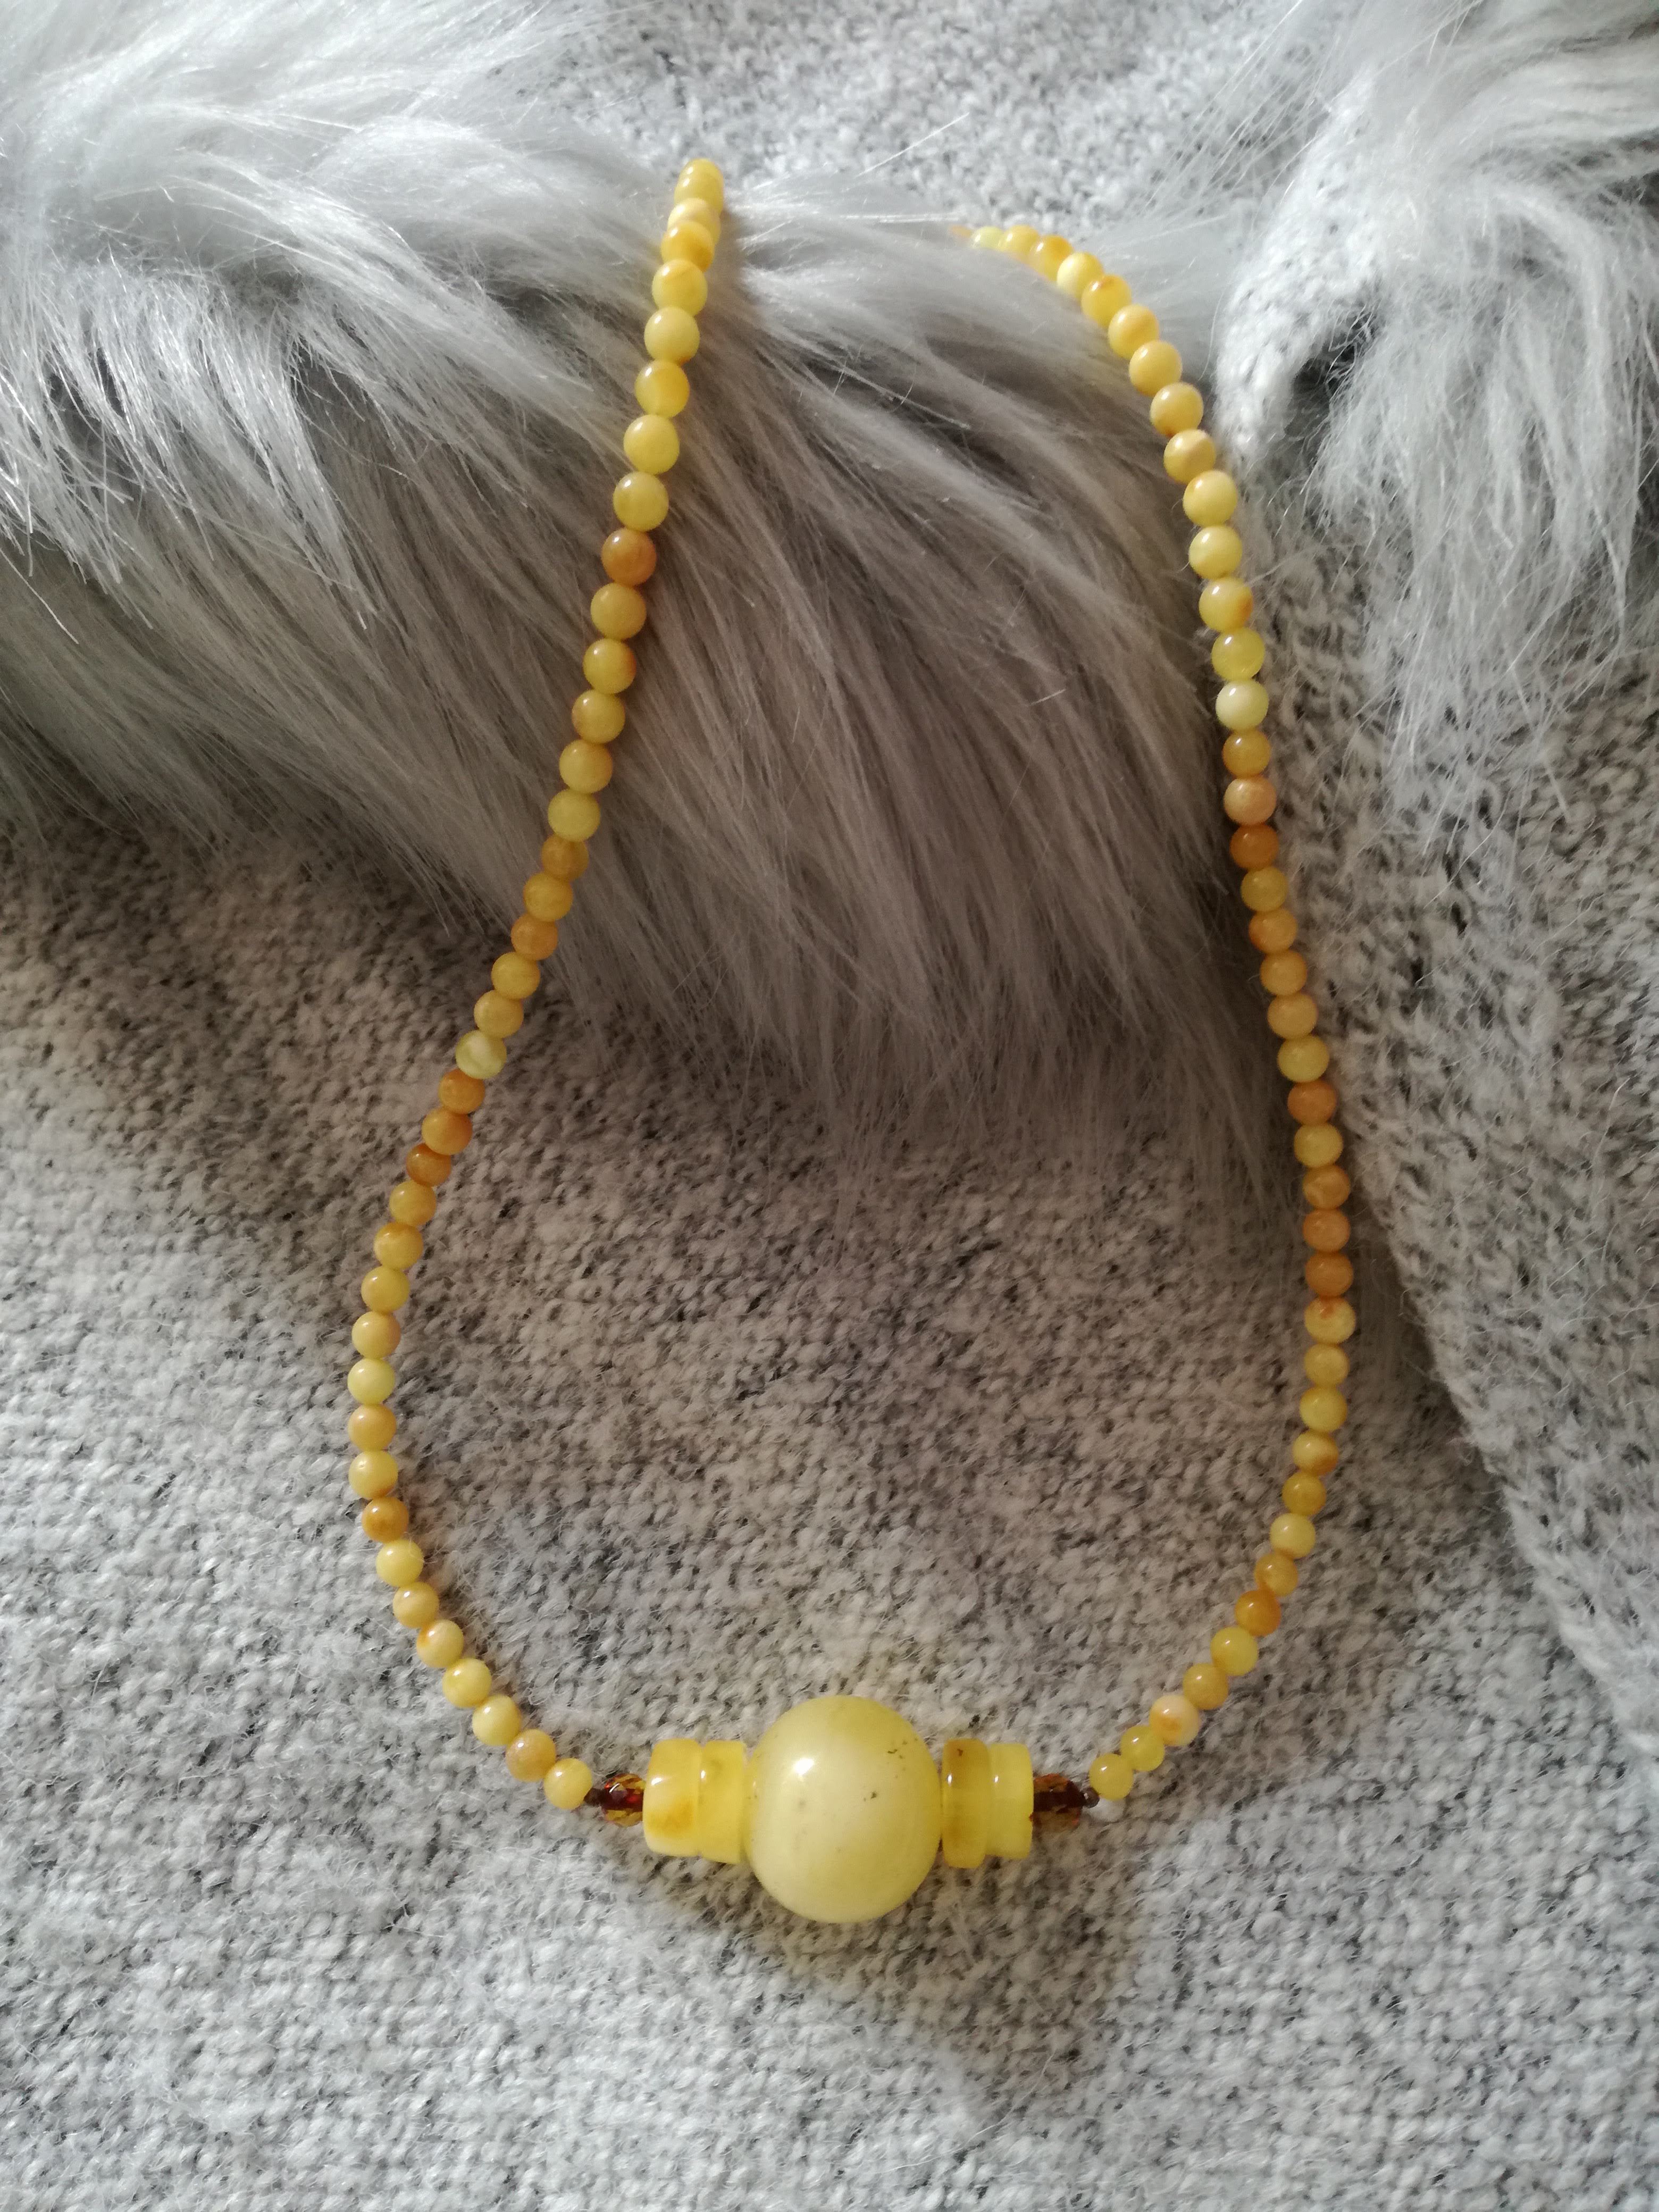 Genuine Handmade Baltic Amber Necklace for Adults, small polished milky beads + one big round milky amber piece, Healing properties, Nursing Mums, Gift for Women